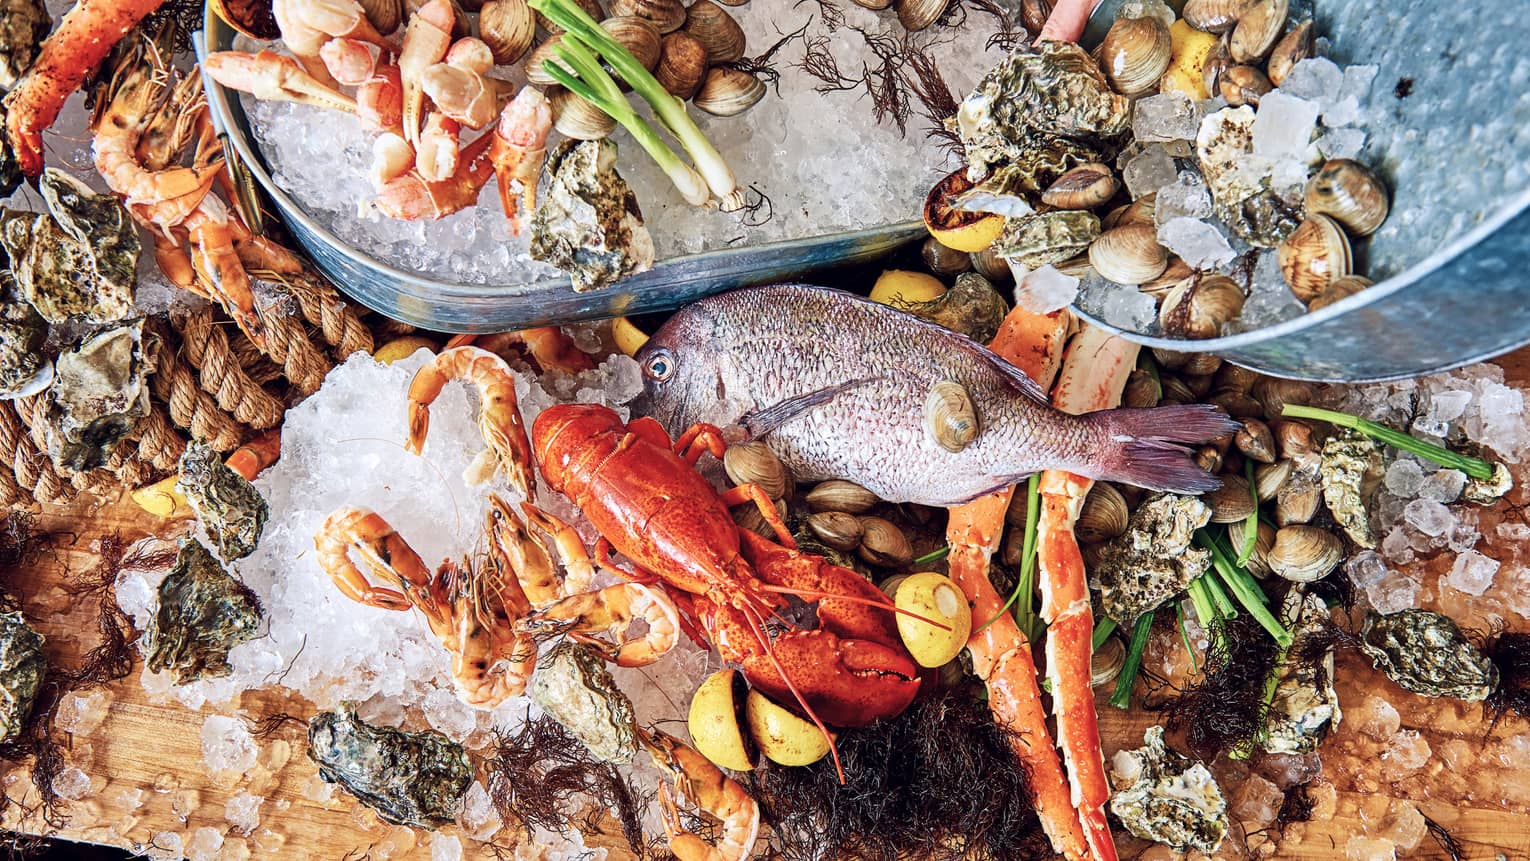 Aerial view seafood platter with whole fish, lobsters, clams and shrimps on bed of ice cubes